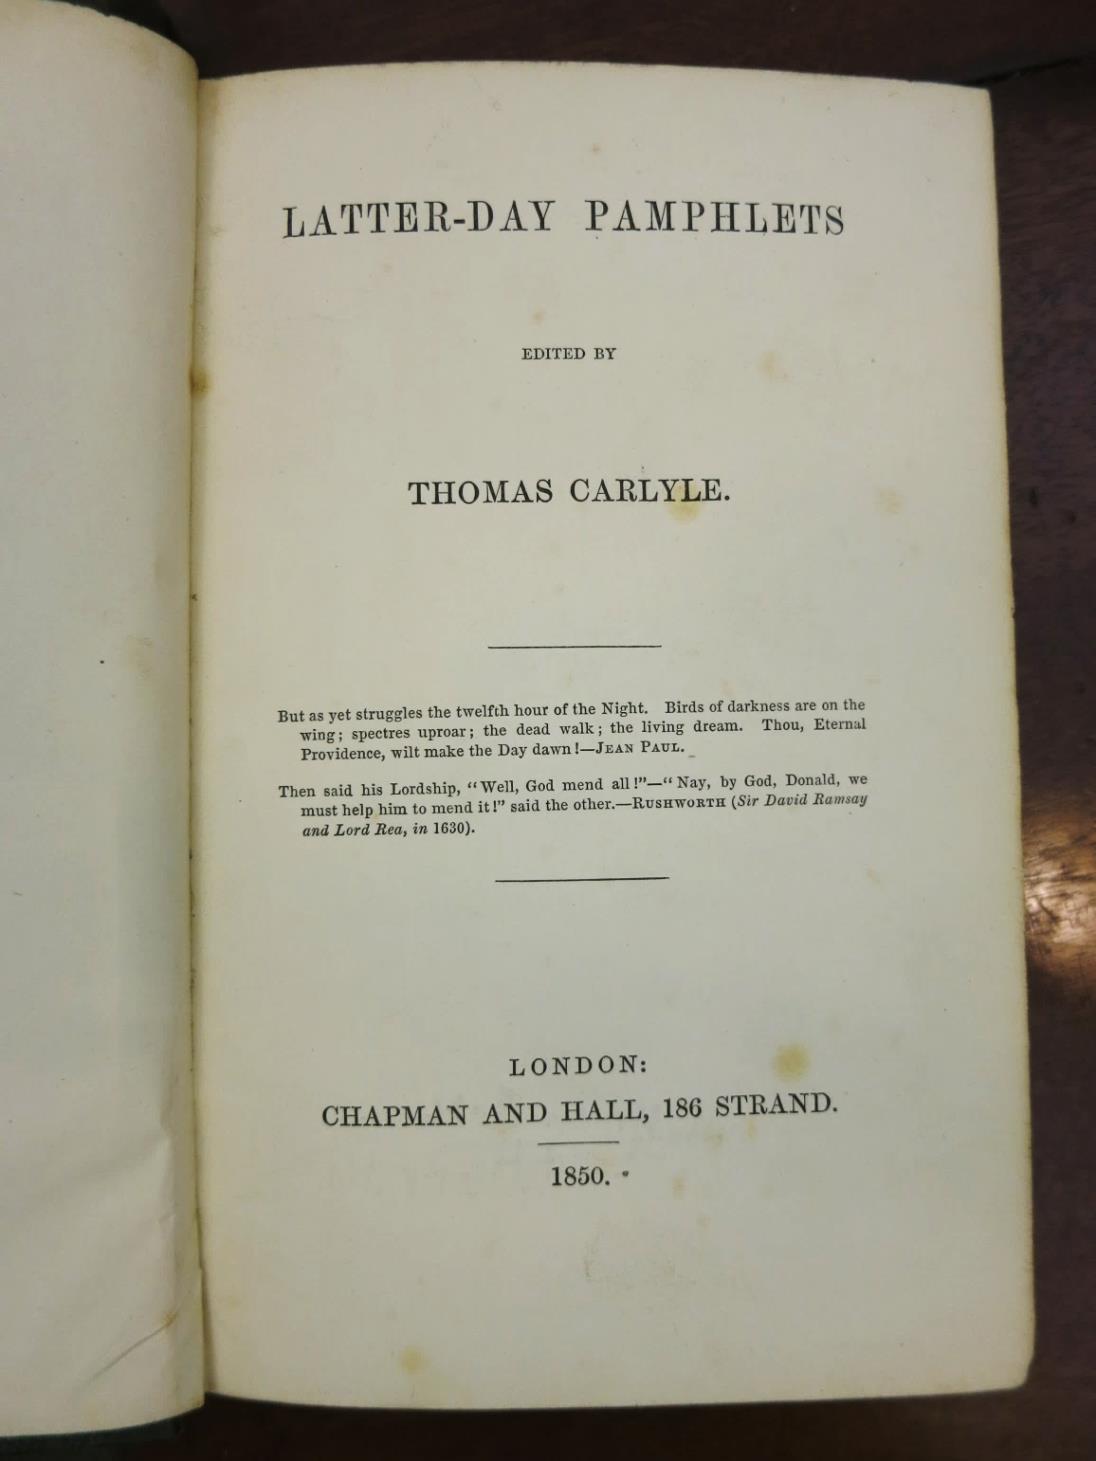 Thomas Carlyle, Latter-Day Pamphlets, 1850, frontispiece